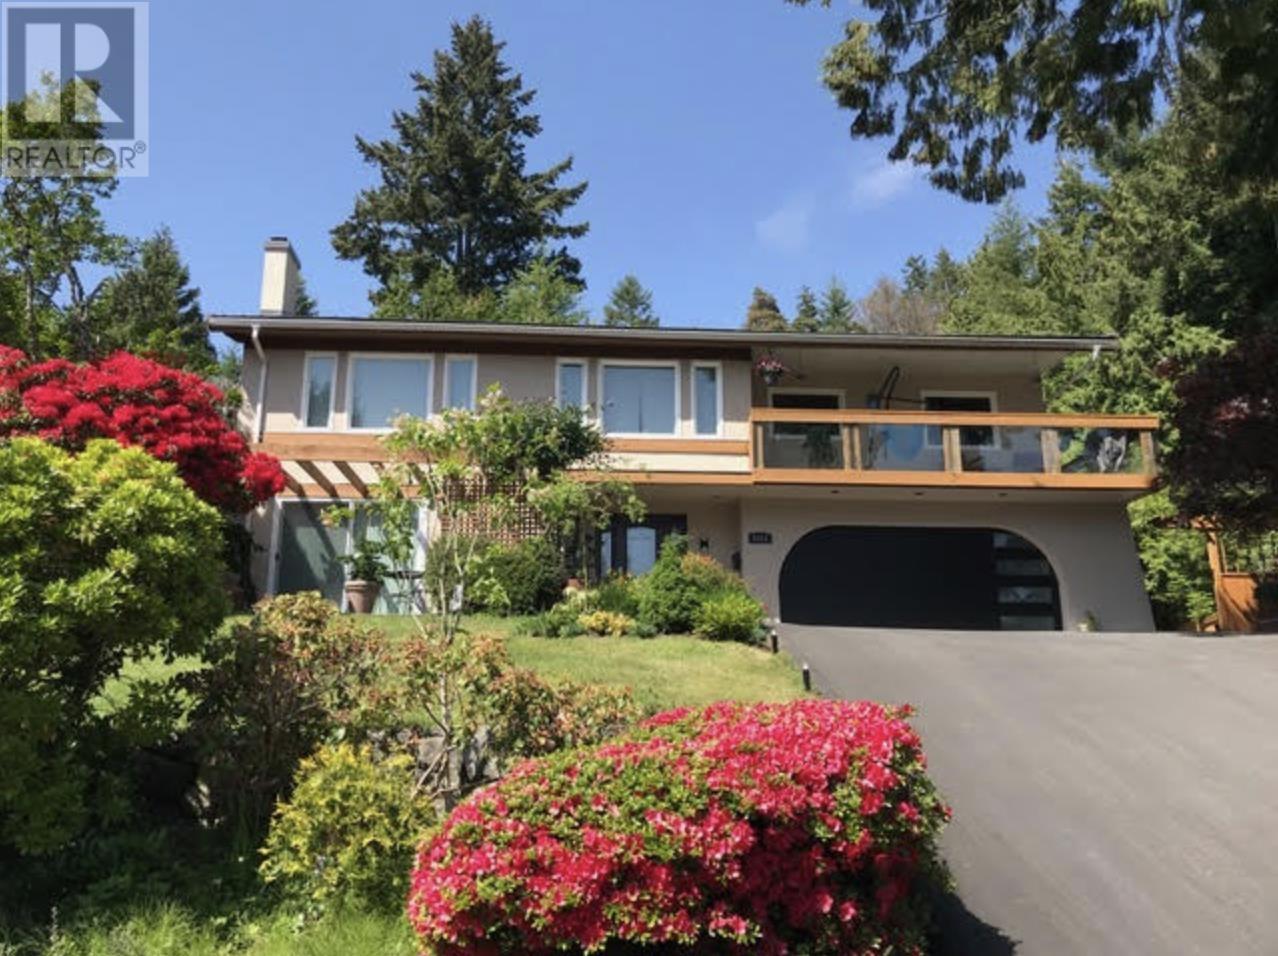 4572 WOODGREEN DRIVE located in West Vancouver, British Columbia